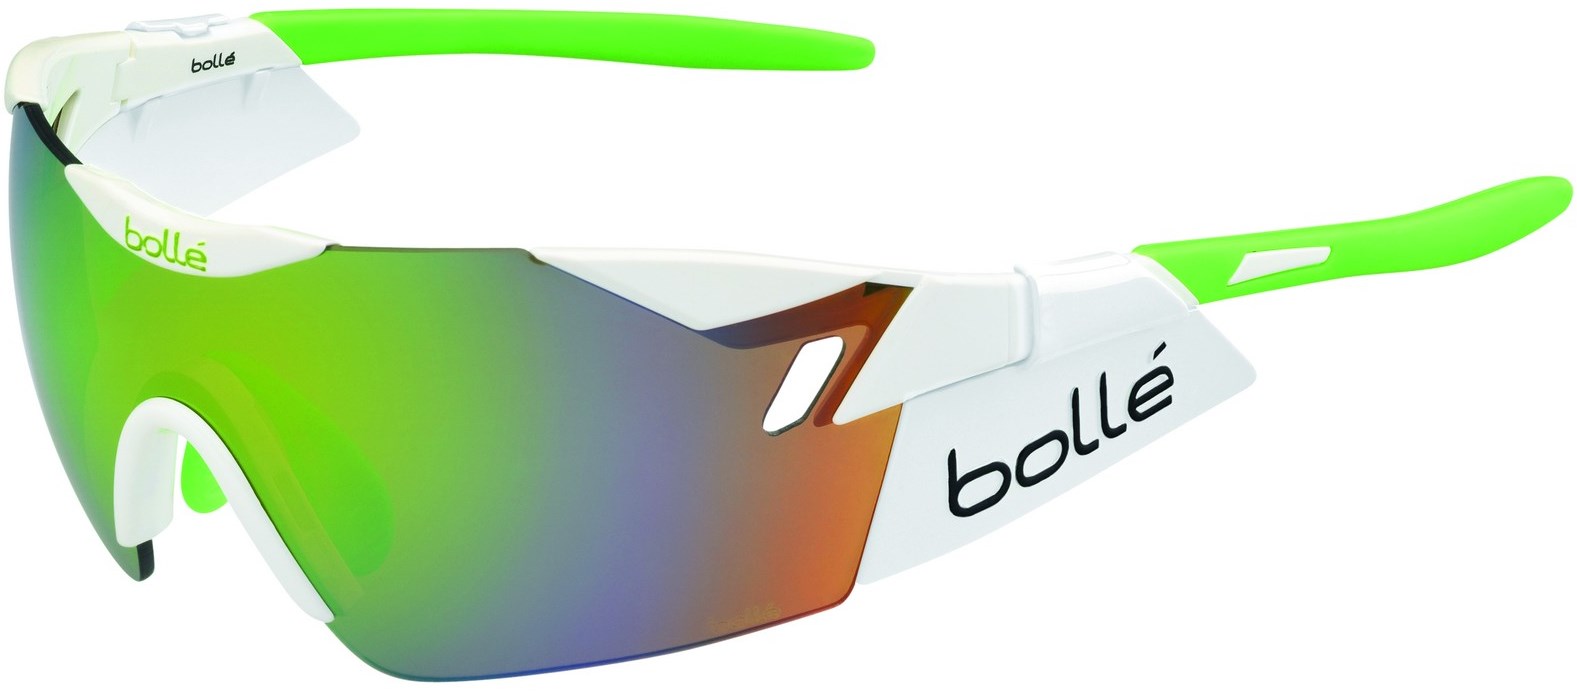 Cycling goggles